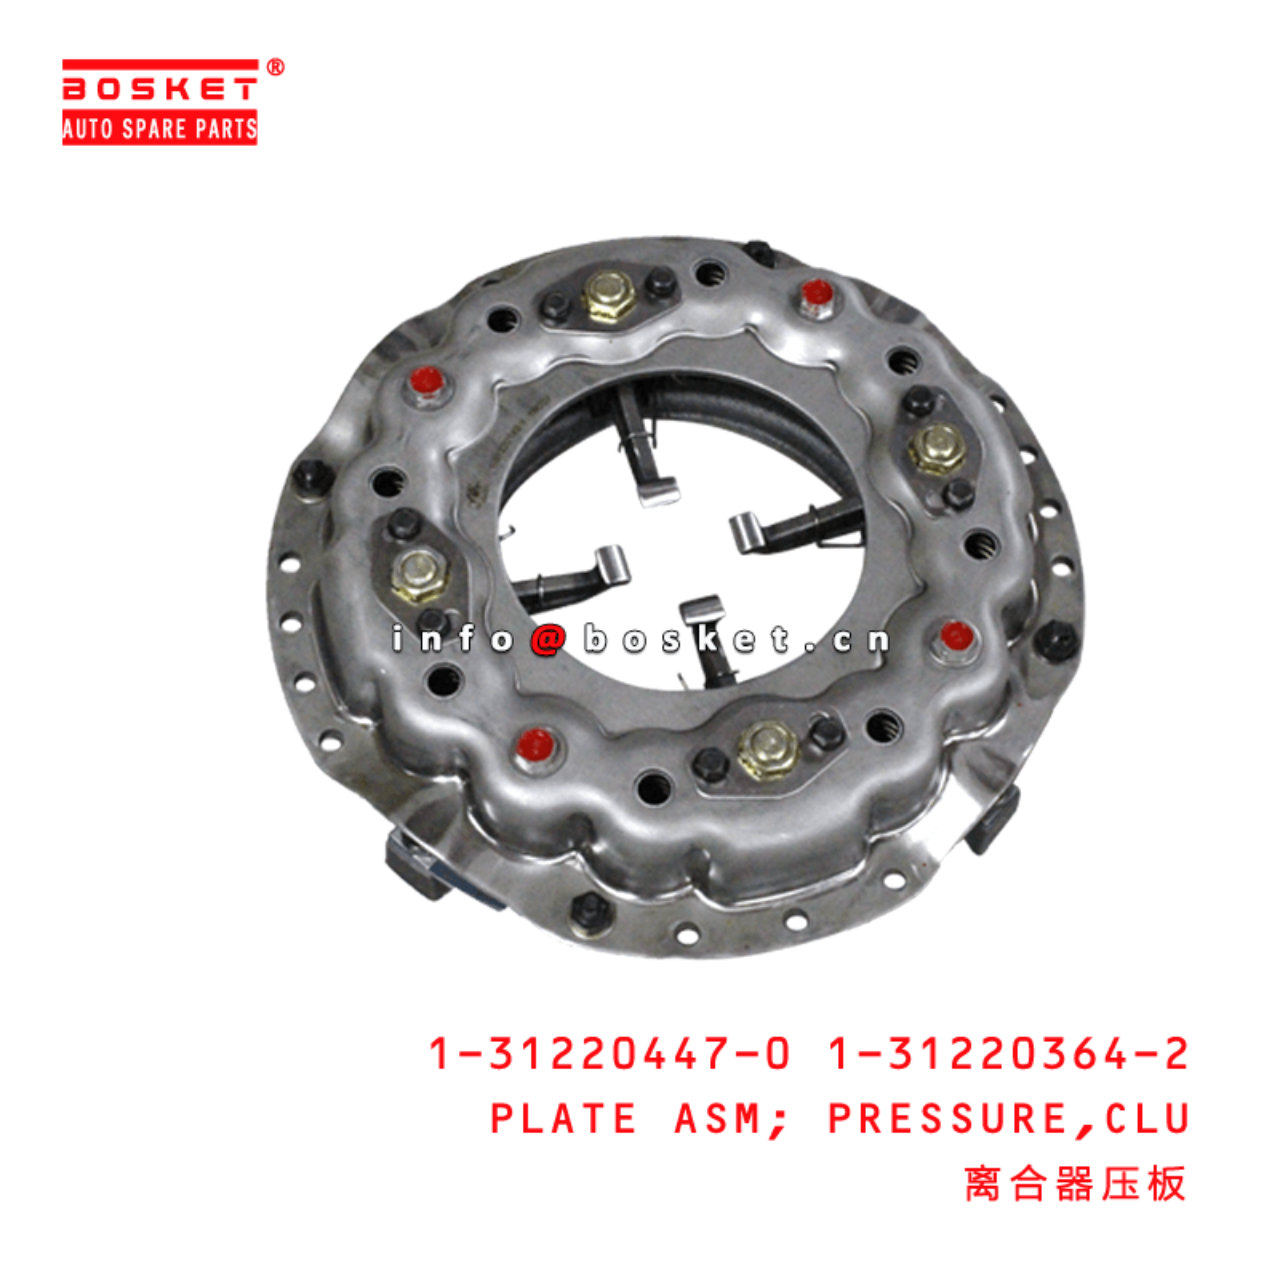 1-31220447-0 1-31220364-2 Clutch Pressure Plate Assembly 1312204470 1312203642 Suitable for ISUZU FR